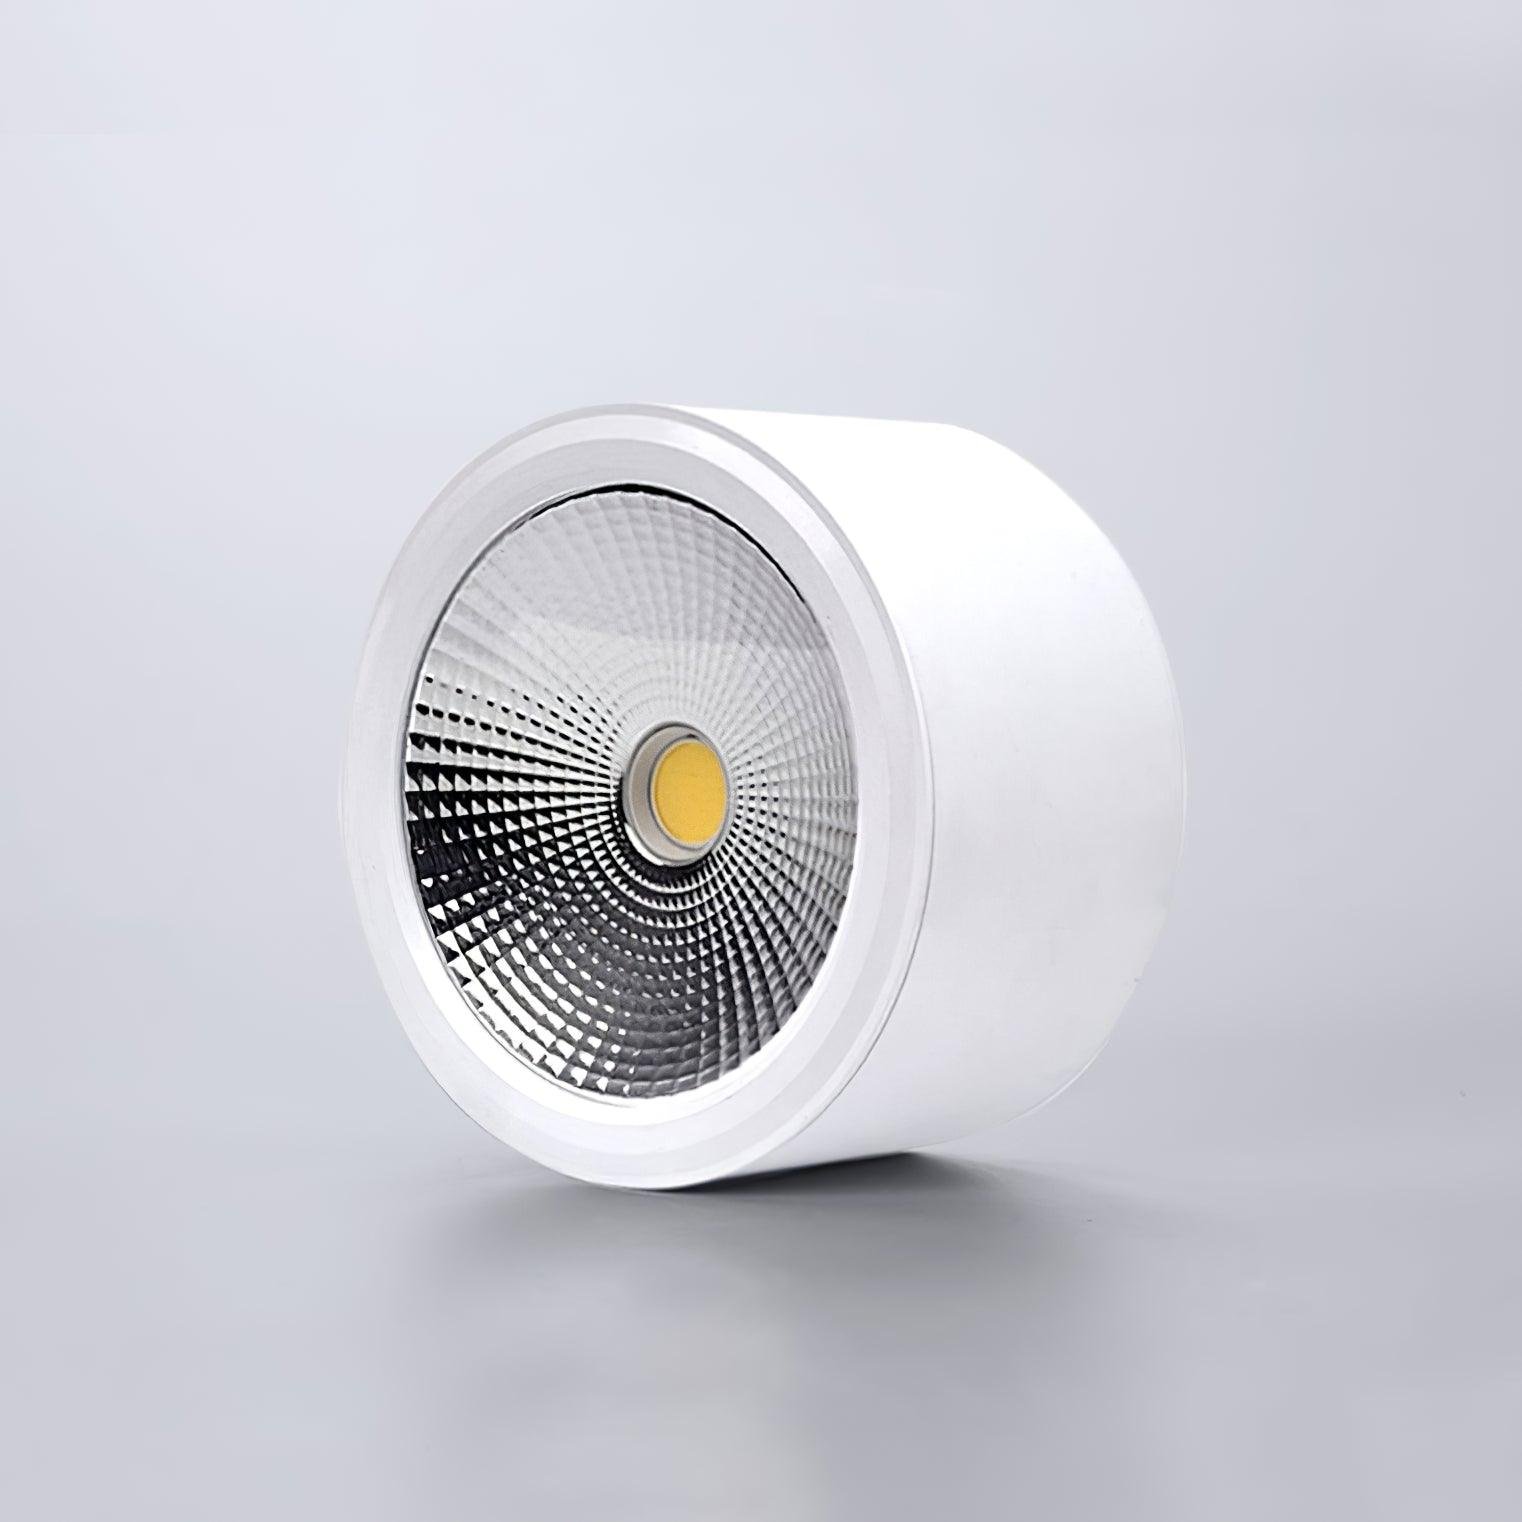 10 Anzio Spotlights in White with Cool Light, 4.5 inch Diameter, 2.6 inch Height